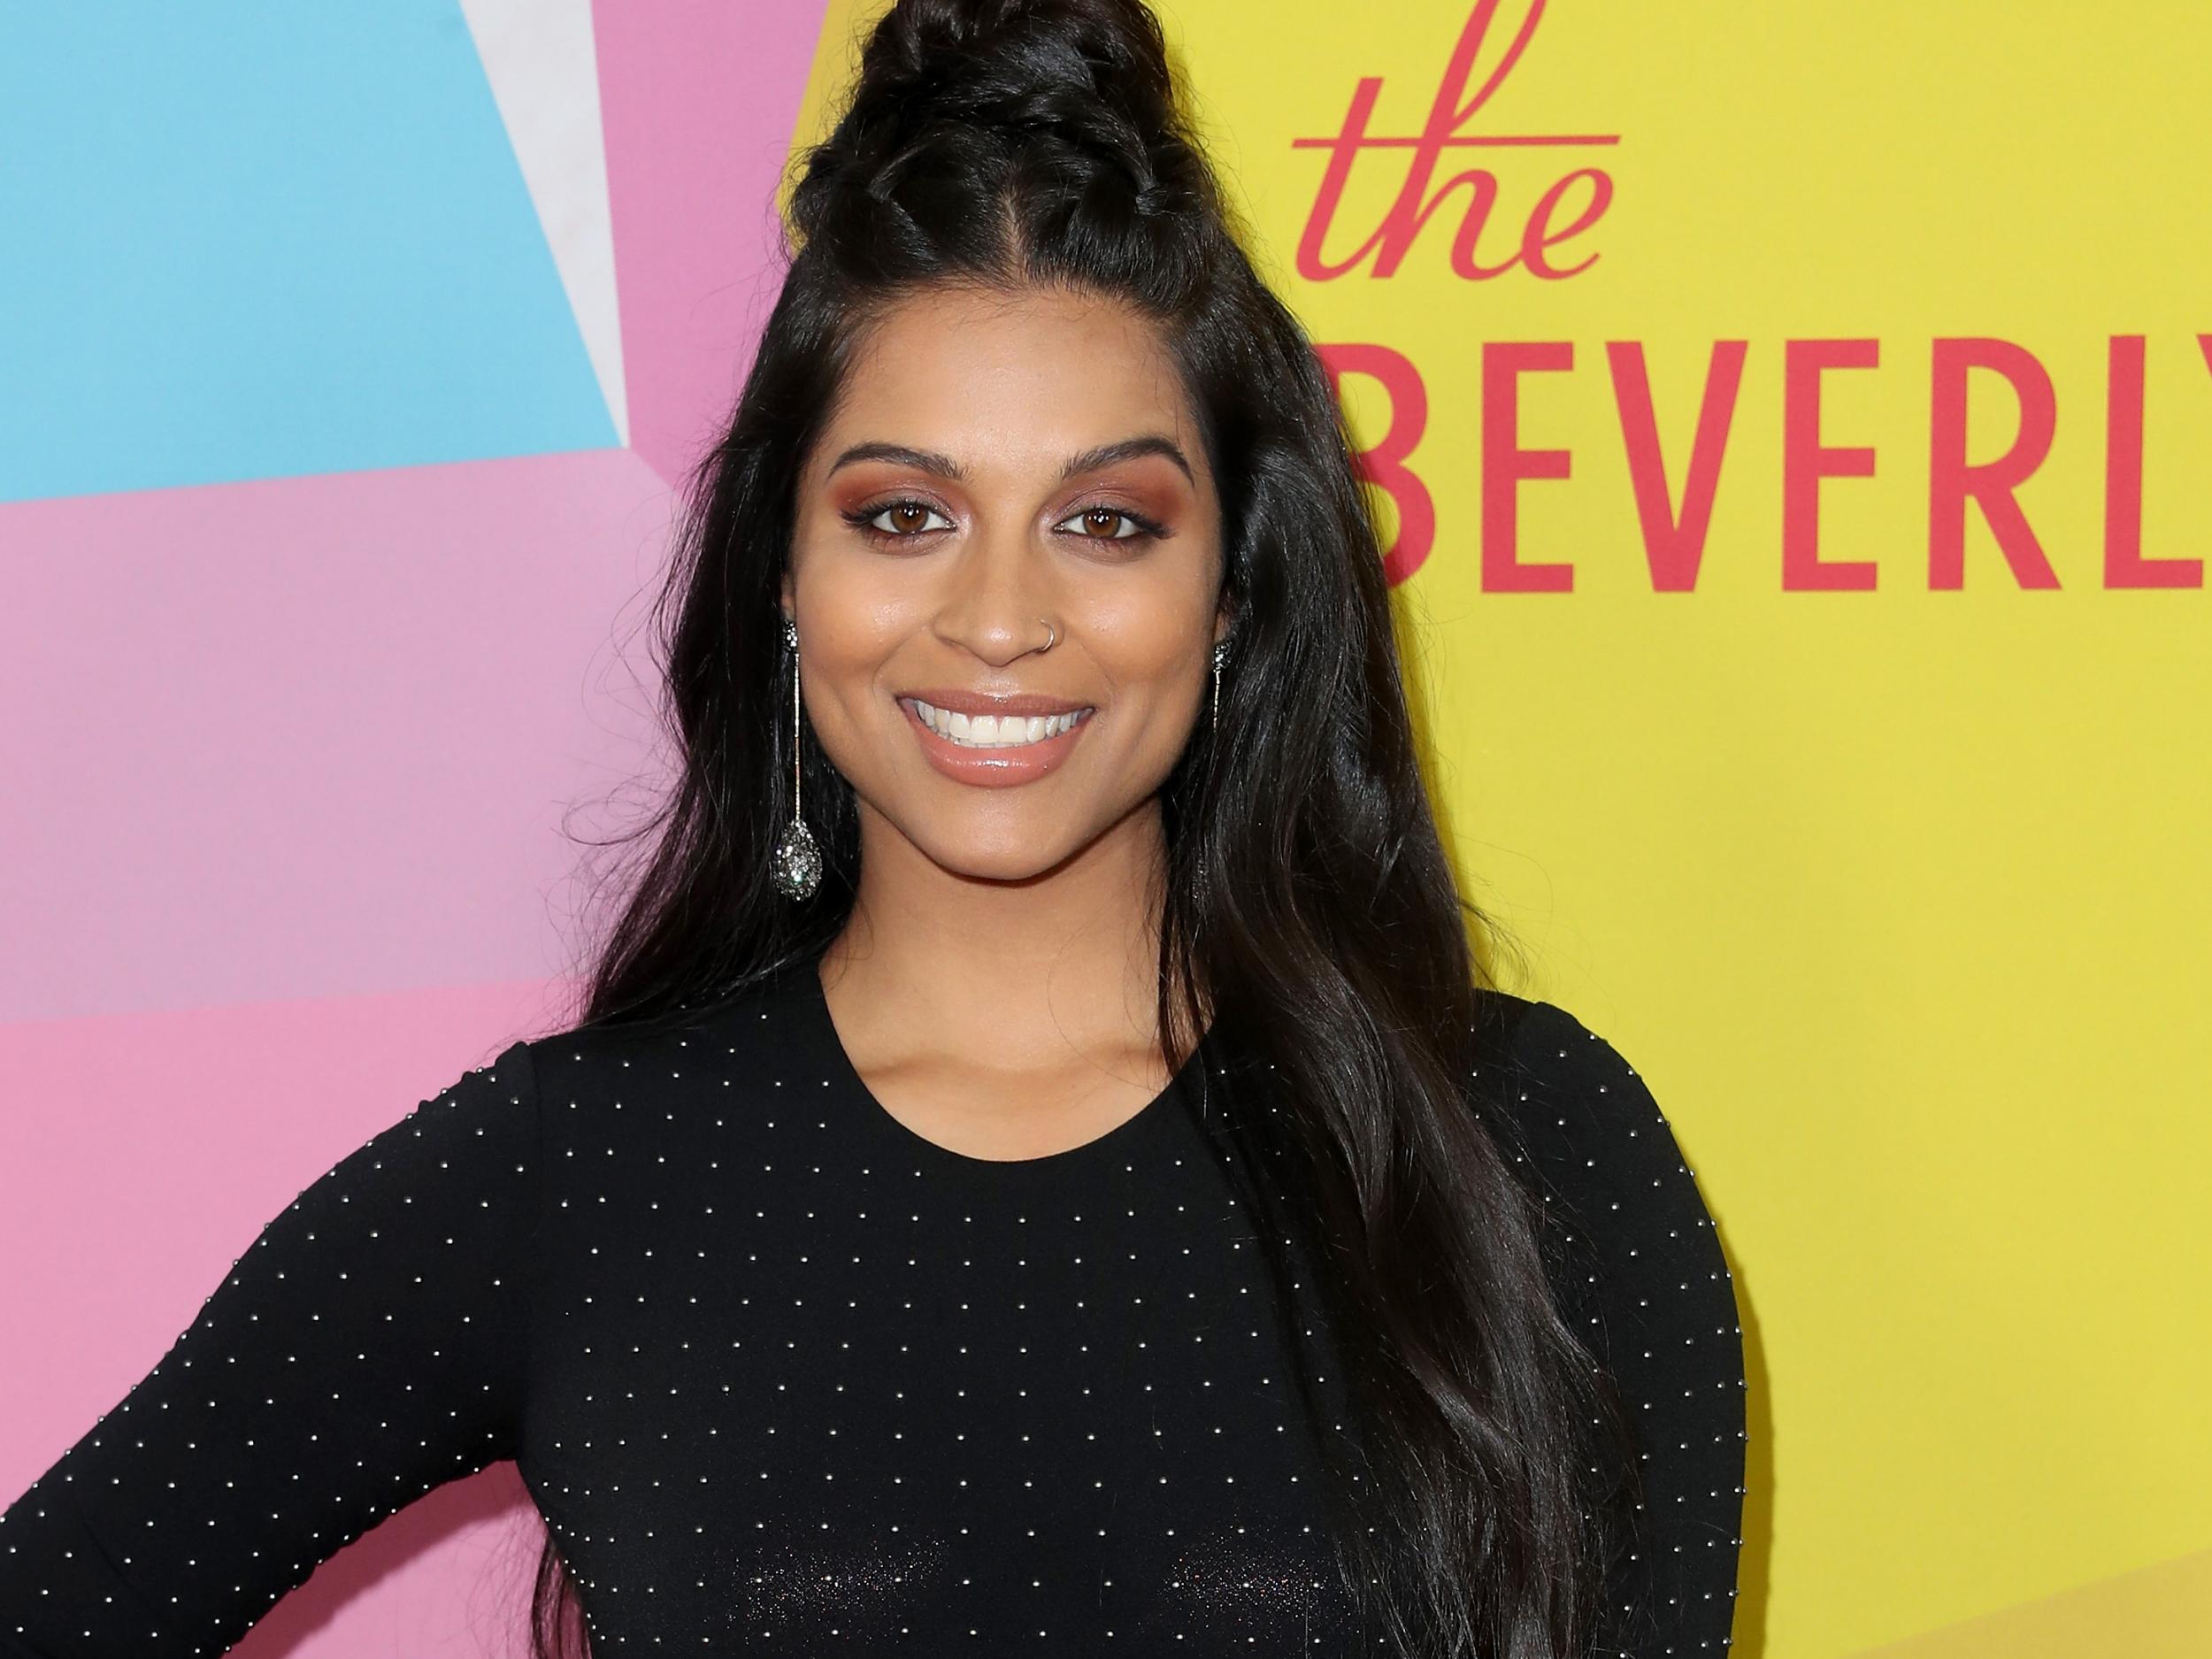 Youtube Star Lilly Singh Gives Away 1000 To Fans In Need After Hearing Their Stories On